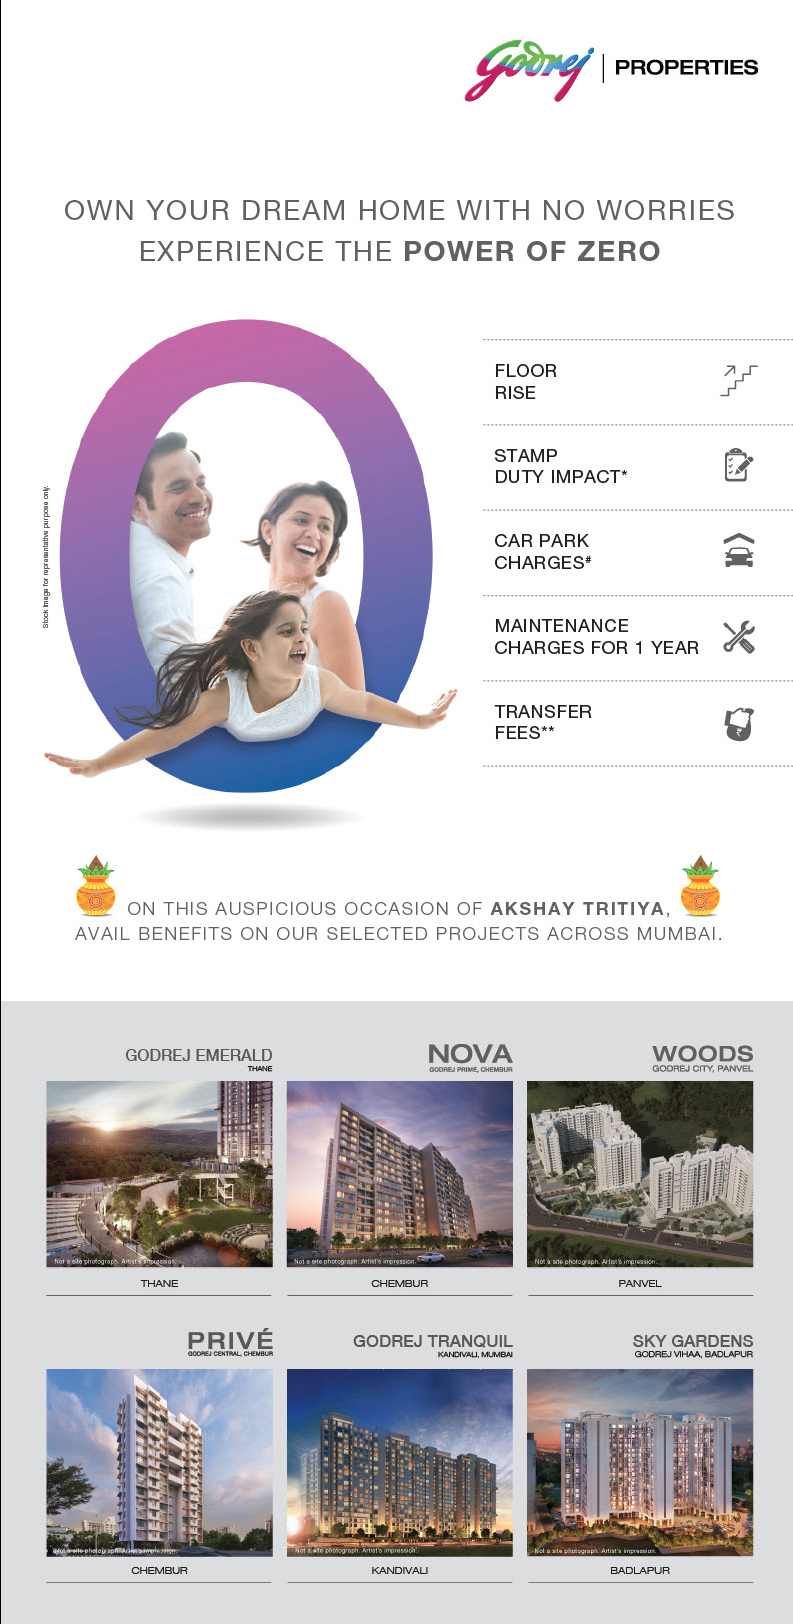 Book a property to experience the power of Zero by Godrej Properties in Mumbai Update